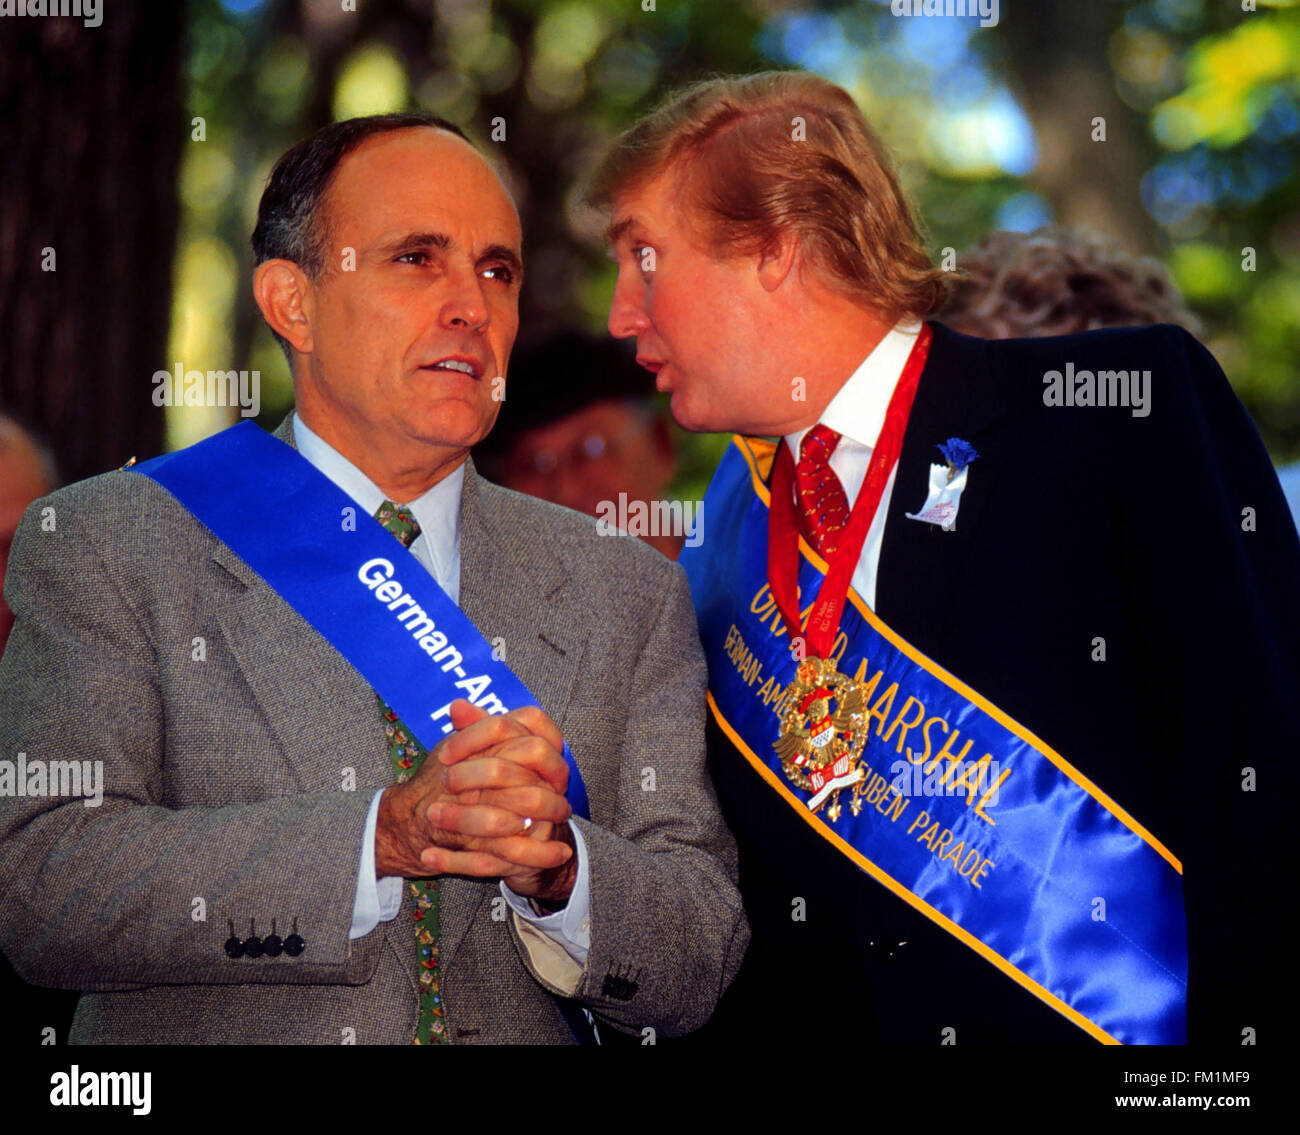 NYC Mayor Rudy Giuliani (L)  and Real Estate Developer Donald Trump (R) at the reviewing stand in the 42nd Annual Steuben Day Parade on September 18, 1999. Mr. Trump, who was Grand Marshal,  has been proposed as a possible candidate for Vice President in the Reform Party, running with Pat Buchanan and Mayor Giuliani is a candidate for Senate in the Rpublican Party.  (© Richard B. Levine) Stock Photo